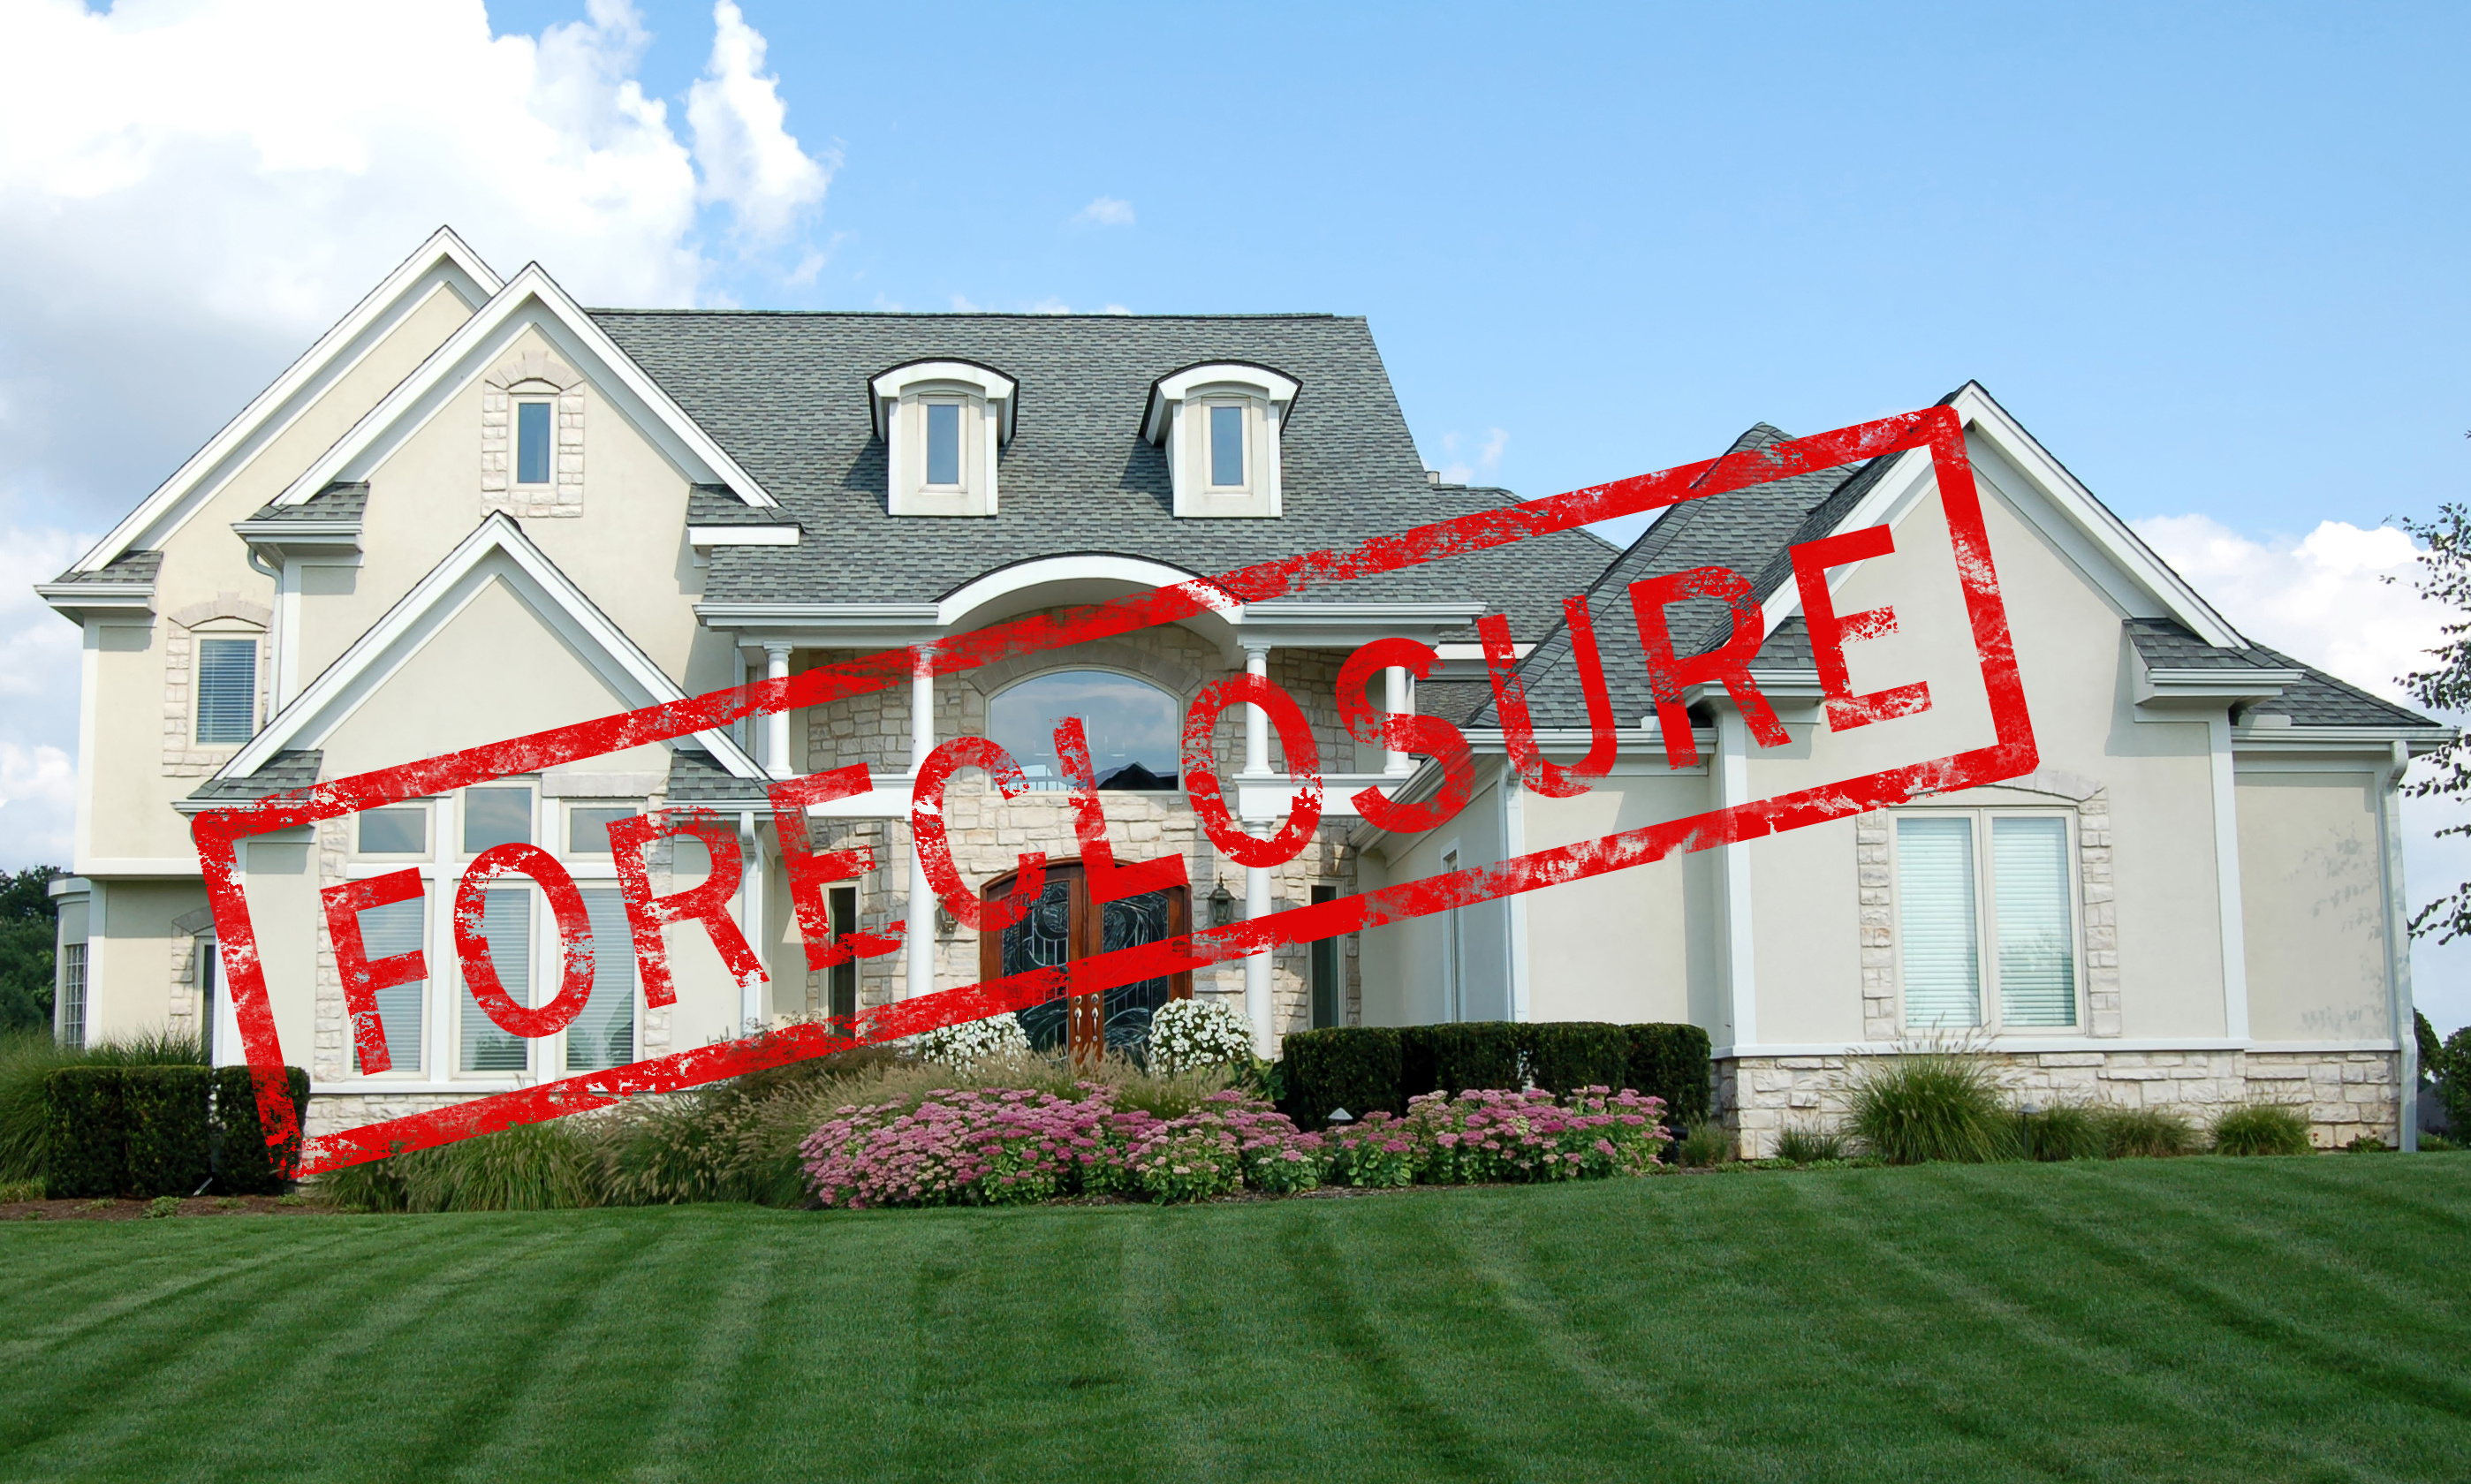 Call Di Cicco & Associates when you need valuations on Santa Rosa foreclosures